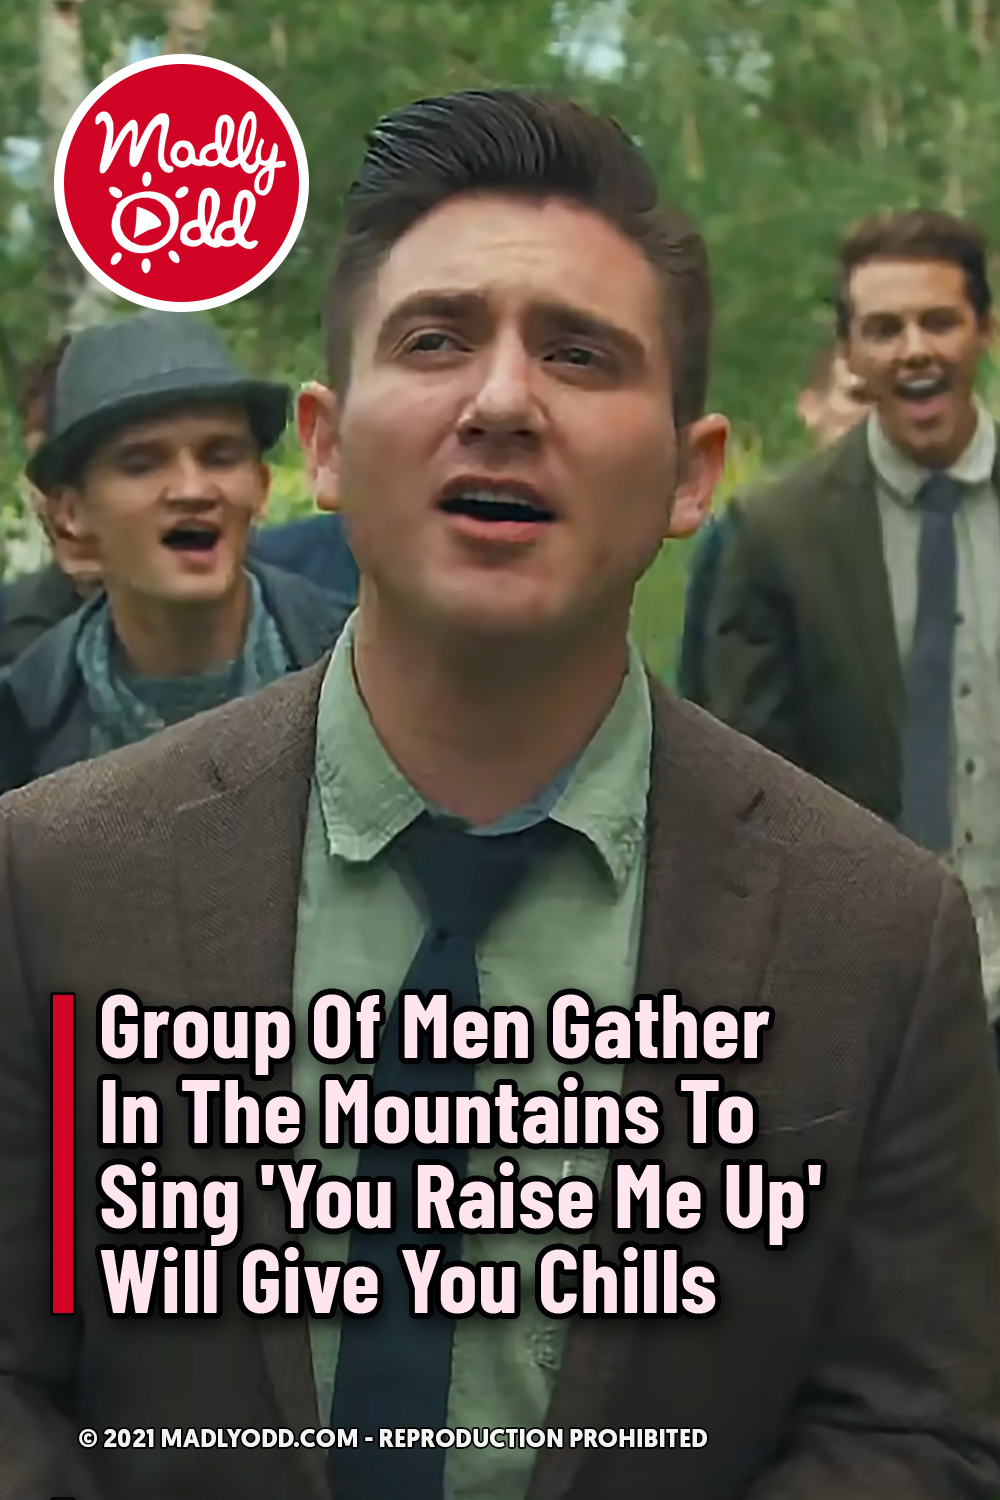 Group Of Men Gather In The Mountains To Sing \'You Raise Me Up\' Will Give You Chills